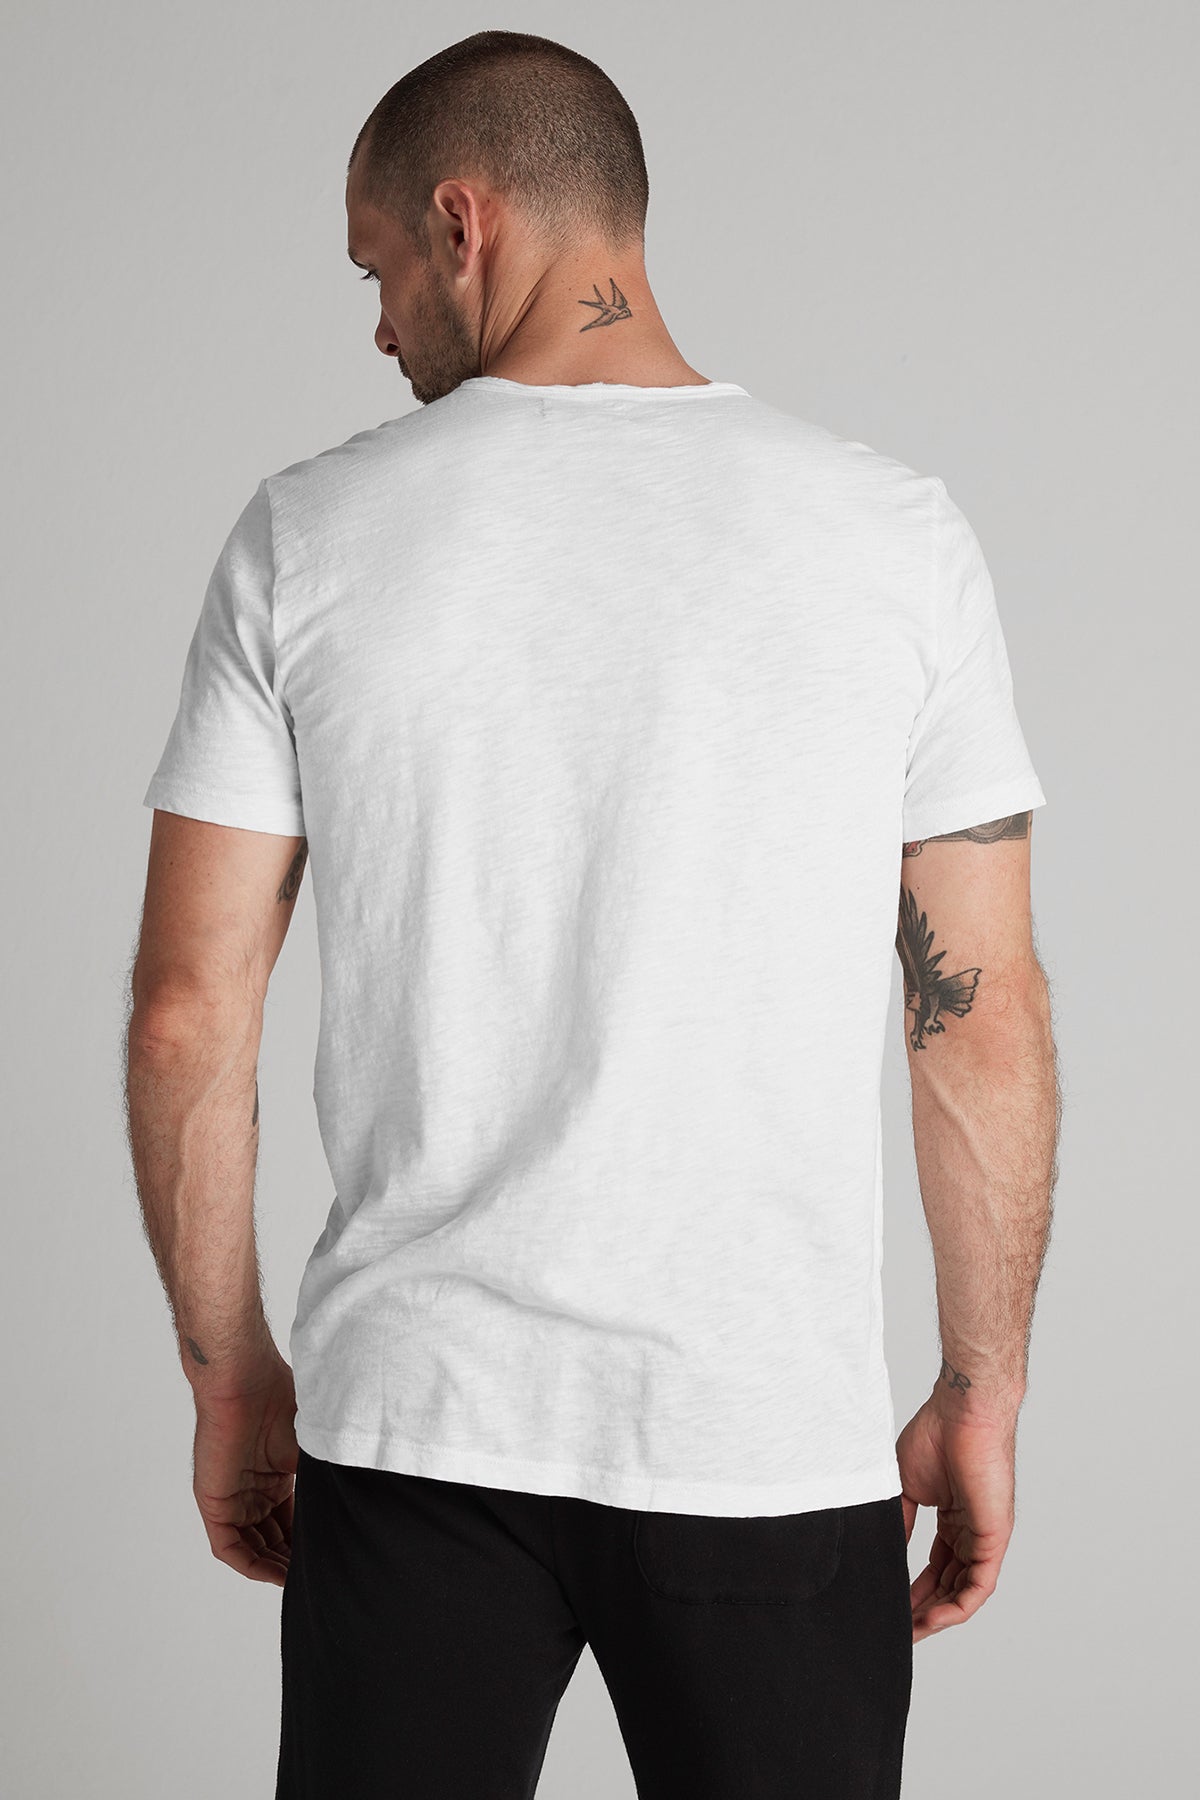 the back view of a man wearing a Velvet by Graham & Spencer CHAD RAW EDGE COTTON SLUB POCKET TEE t - shirt.-25485730775233